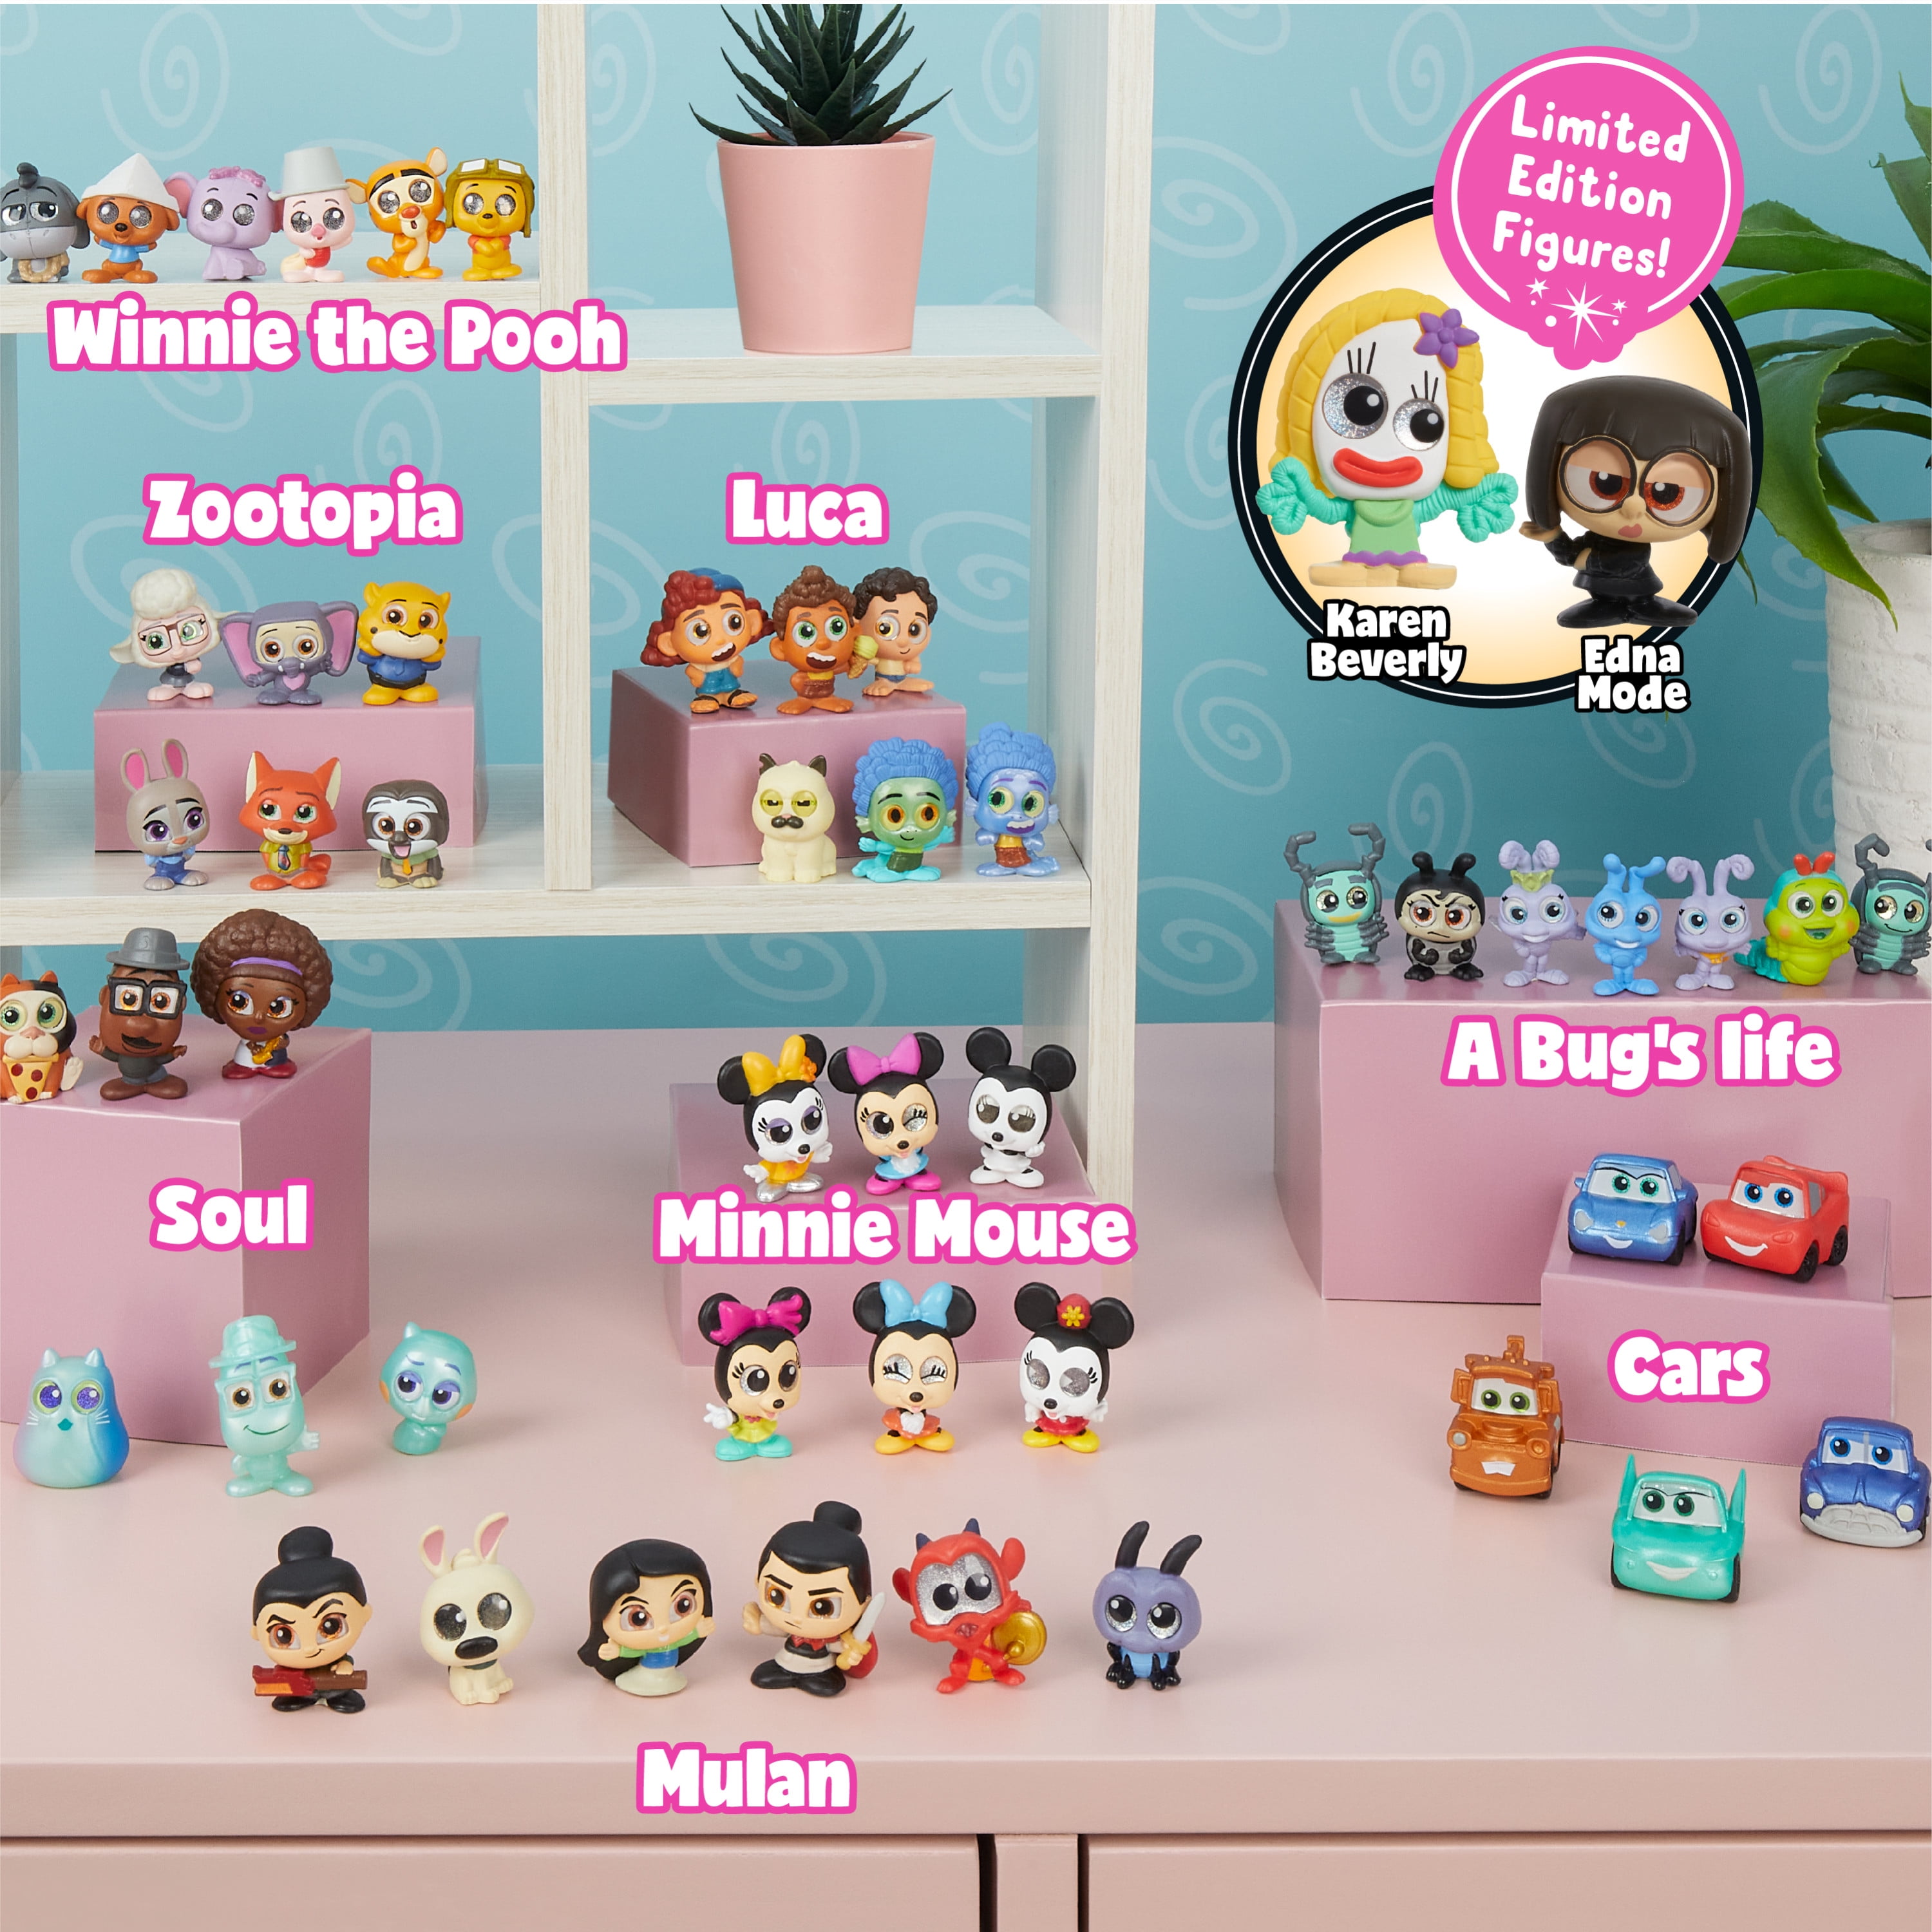 Disney Doorables NEW Multi Peek Series 10, Collectible Blind Bag Figures,  Styles May Vary, Officially Licensed Kids Toys for Ages 5 Up by Just Play